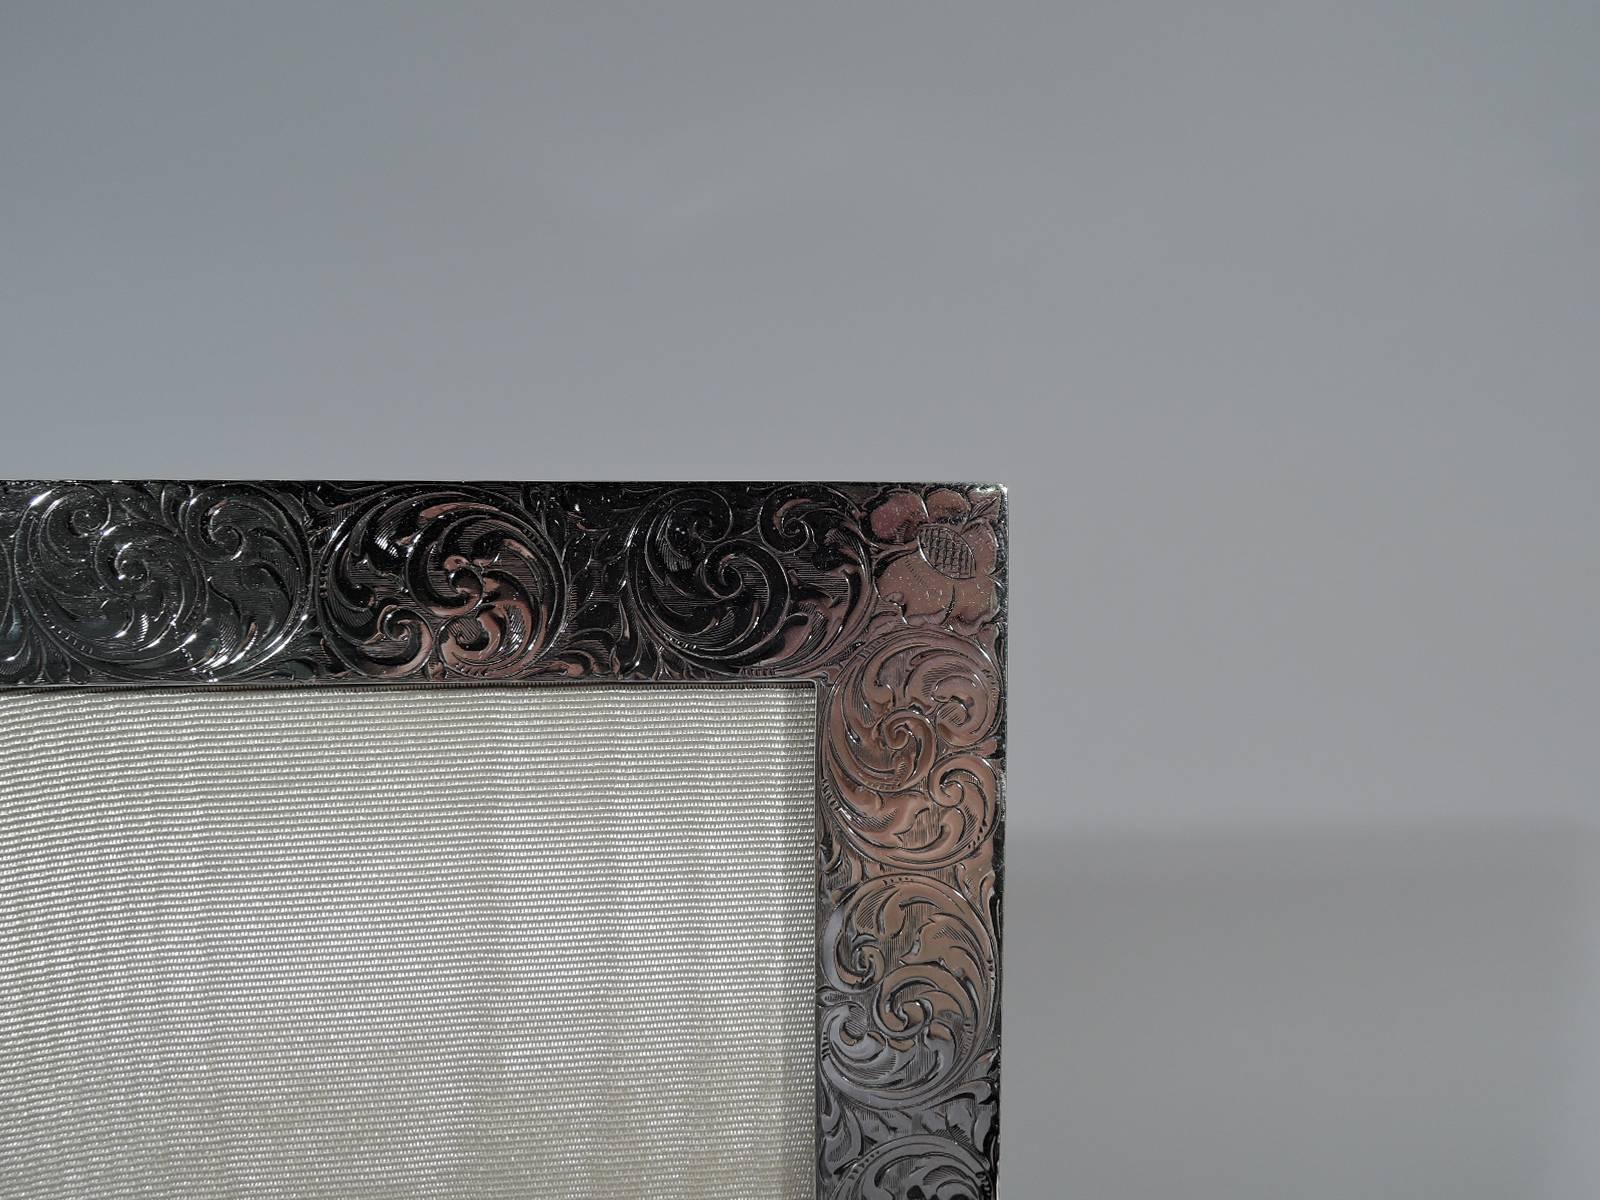 Edwardian sterling silver picture frame. Made by Tiffany & Co. in New York, circa 1910. Rectangular window bordered by engraved and fluid scrollwork and flowers. Tubular cartouche (vacant). With glass, silk lining, and stained-wood back and hinged